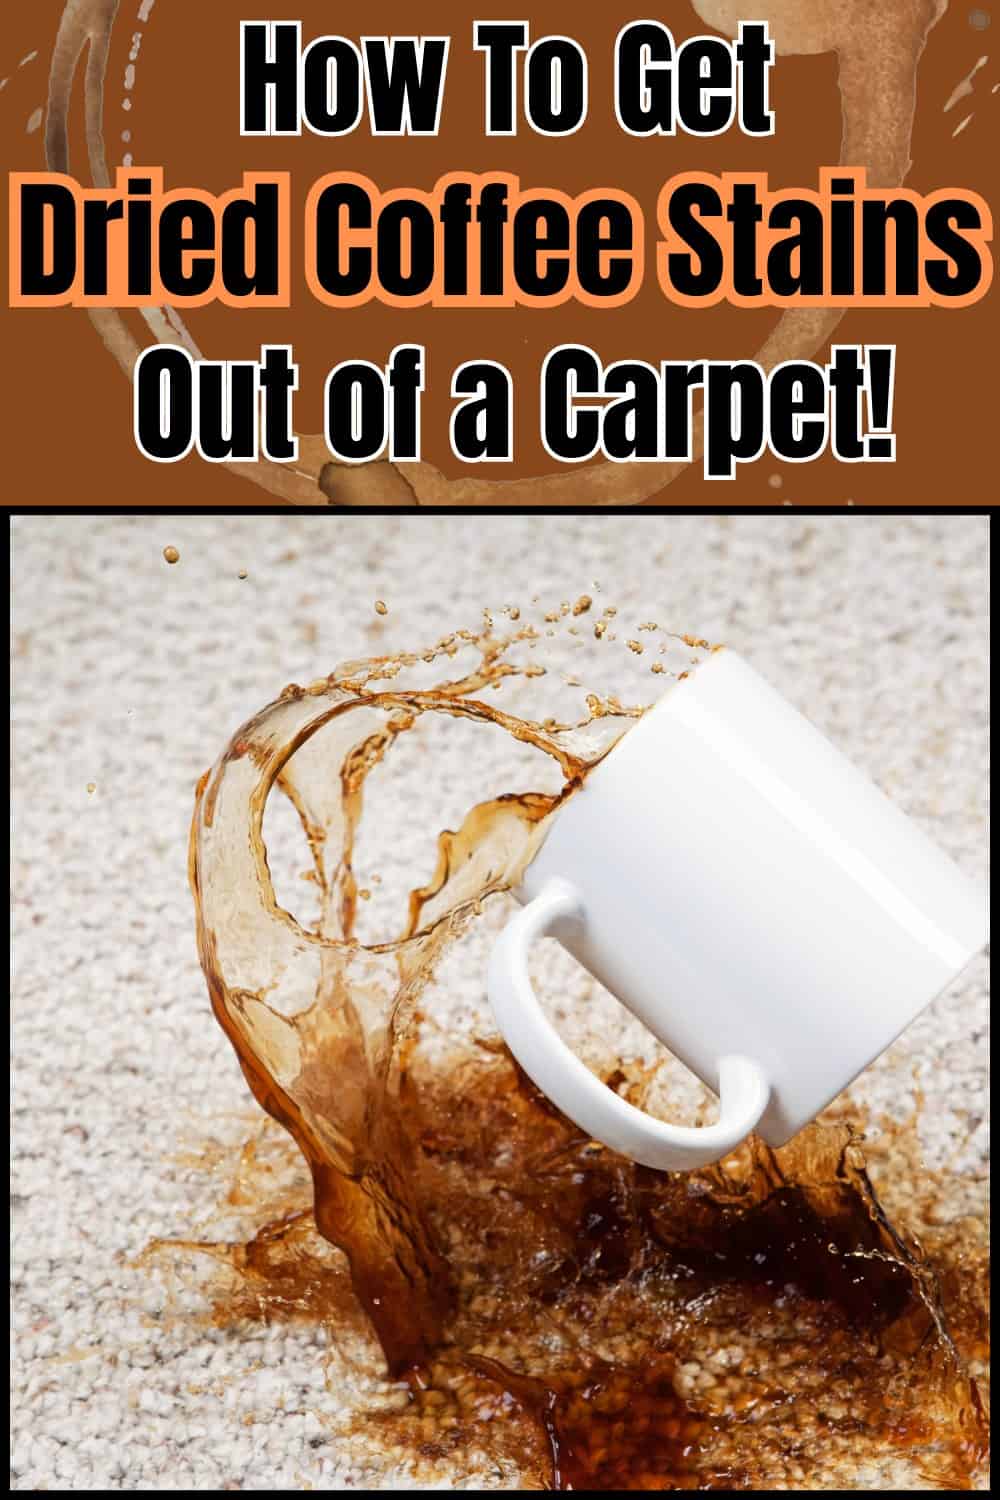 Use Carpet Stain Remover To Clean Coffee